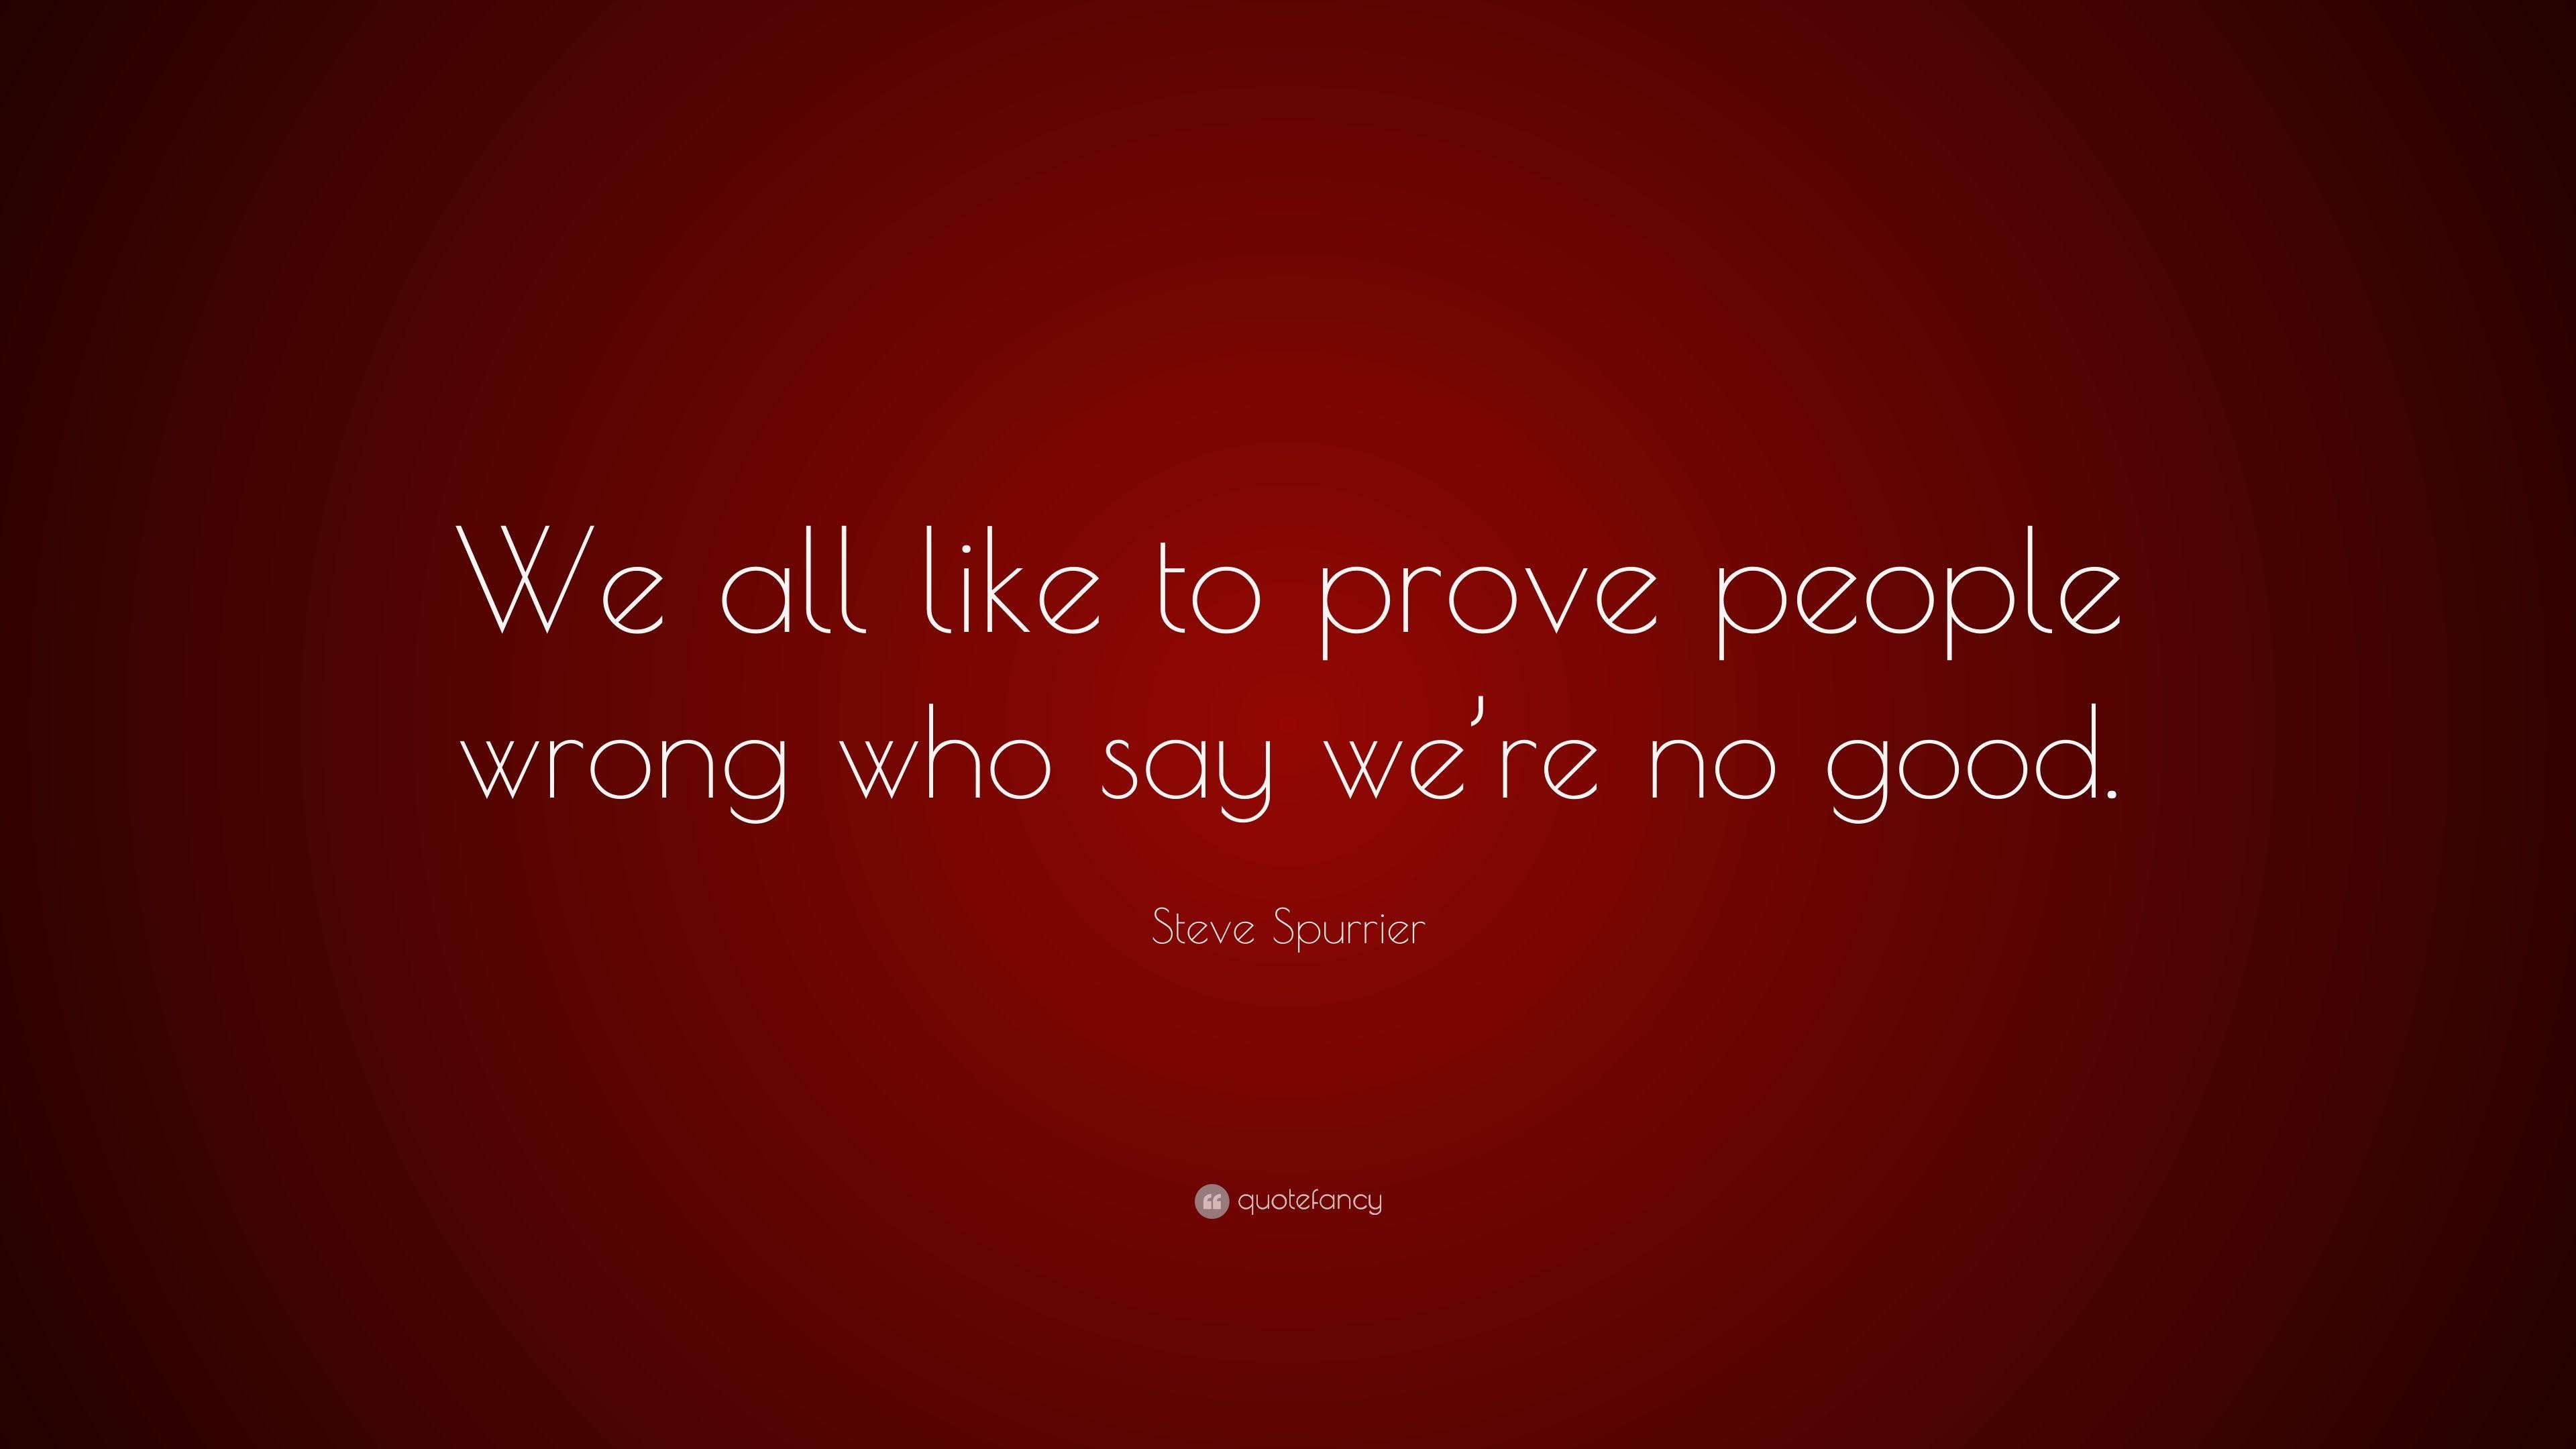 Steve Spurrier Quote: “We all like to prove people wrong who say